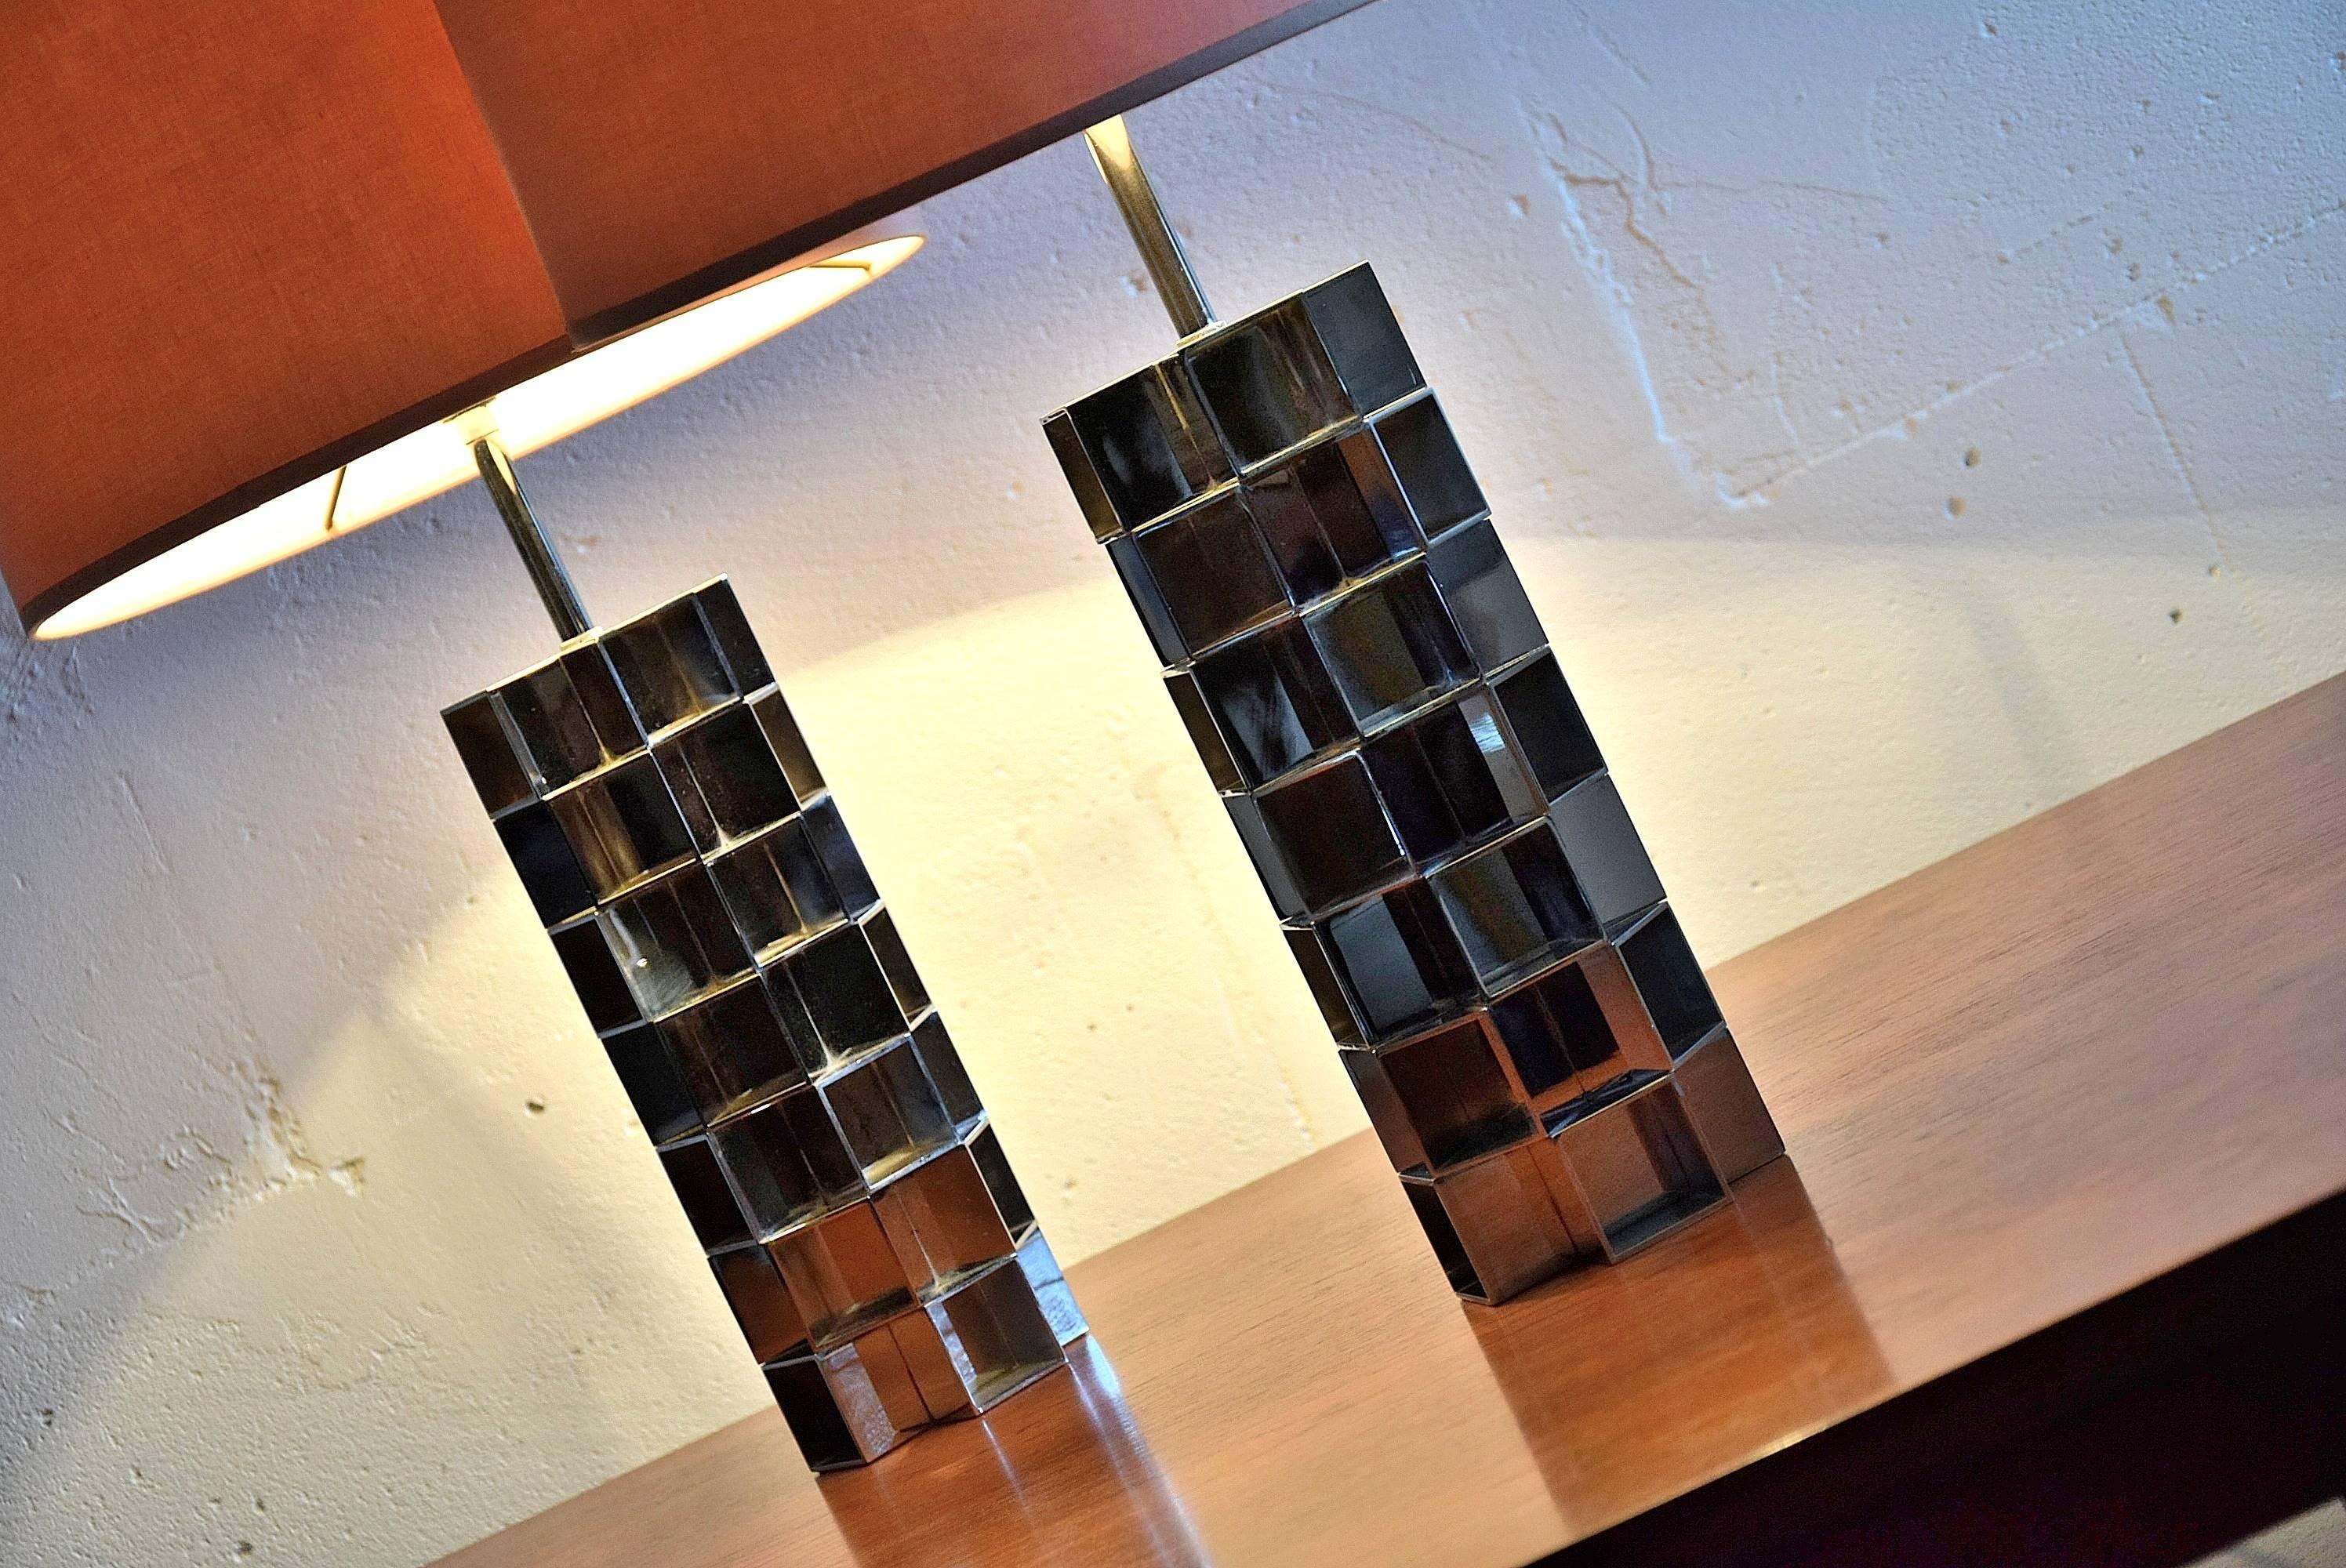 Pierre Cardin style pair of 1970s stylish chrome table lamps.
The base/chrome of both lamps is in excellent condition. The shades have some minor spots.
The measurements of the shades are H 32.5 x D 31.5 cm.
The measurements of the bases are H 28 x